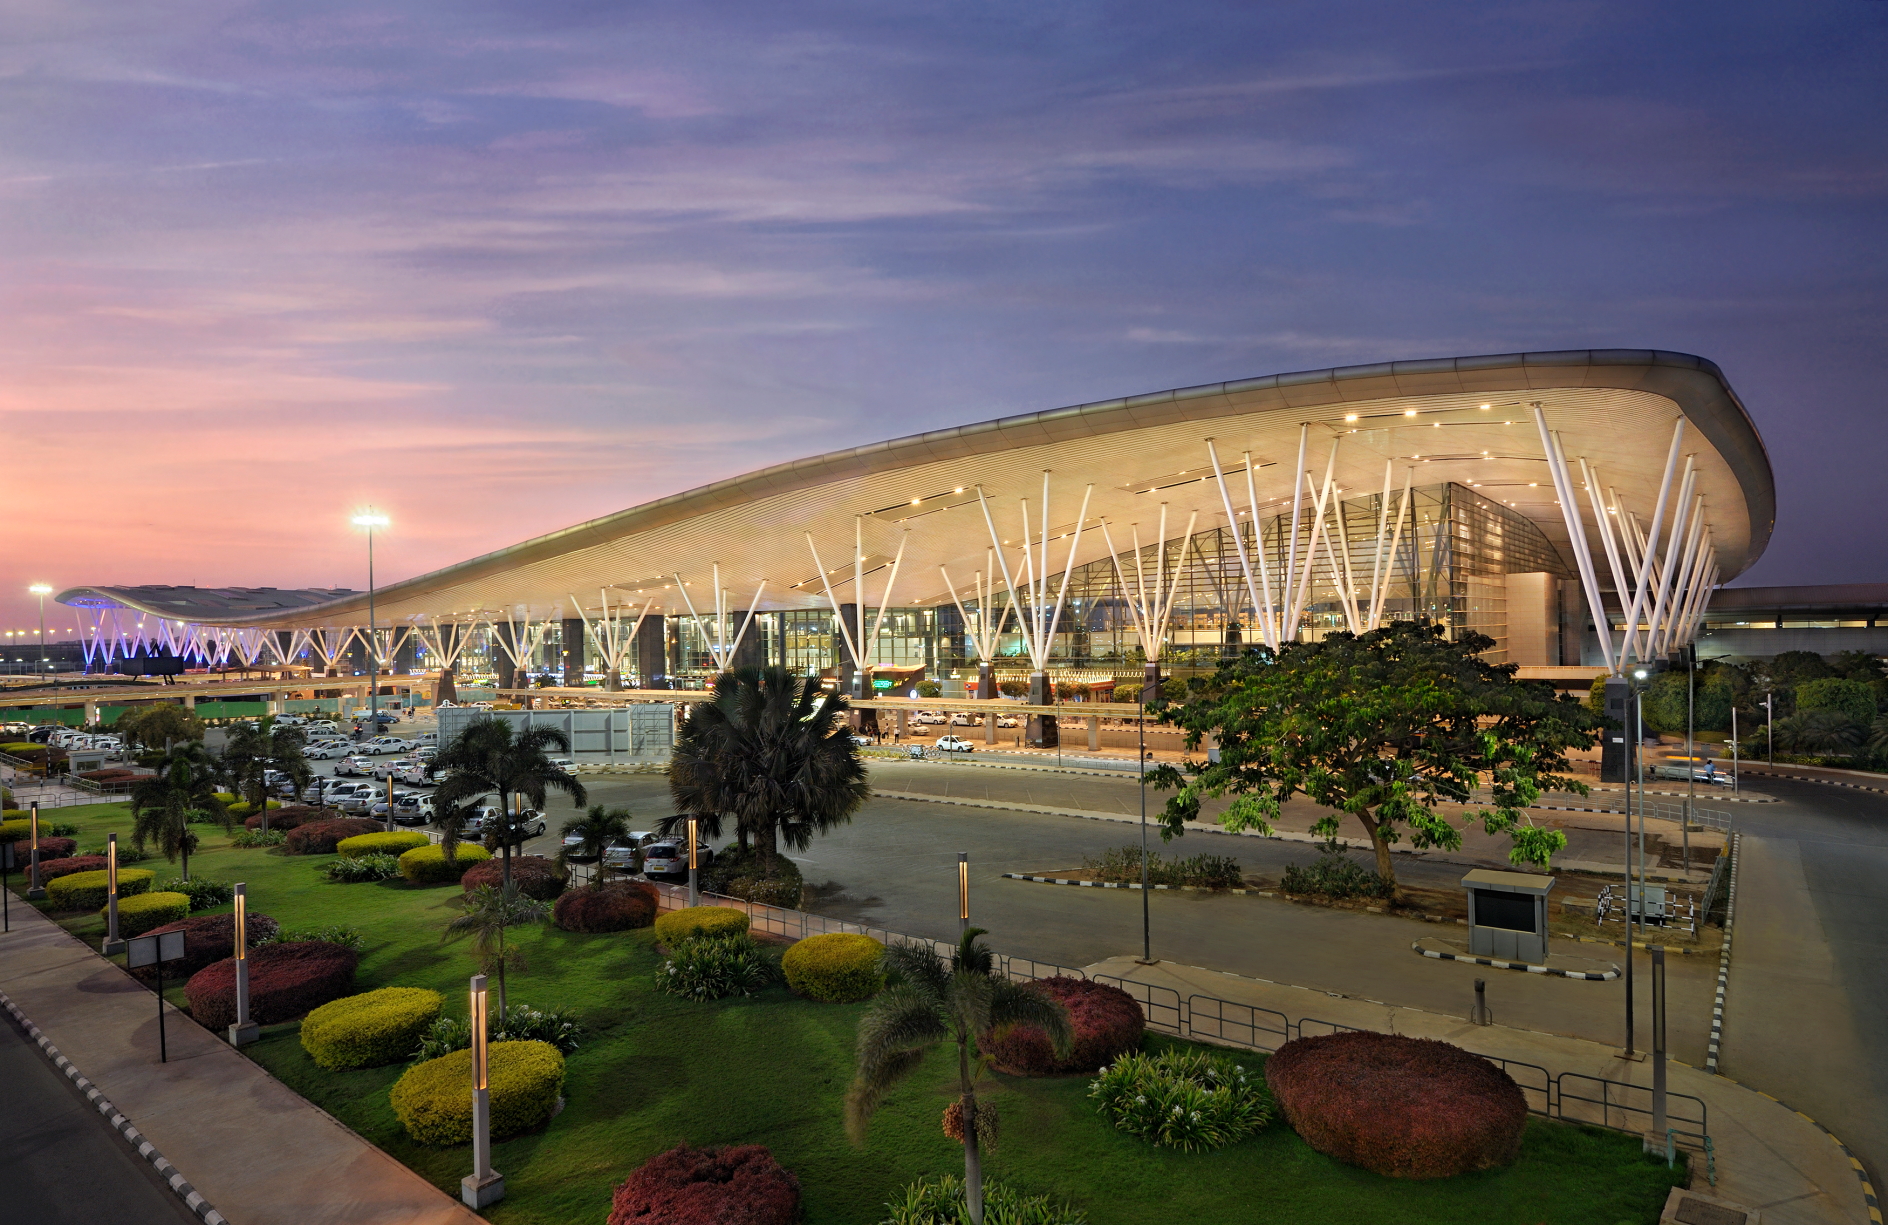 T1 at Kempegowda International Airport in Bengaluru, India. Click to enlarge.